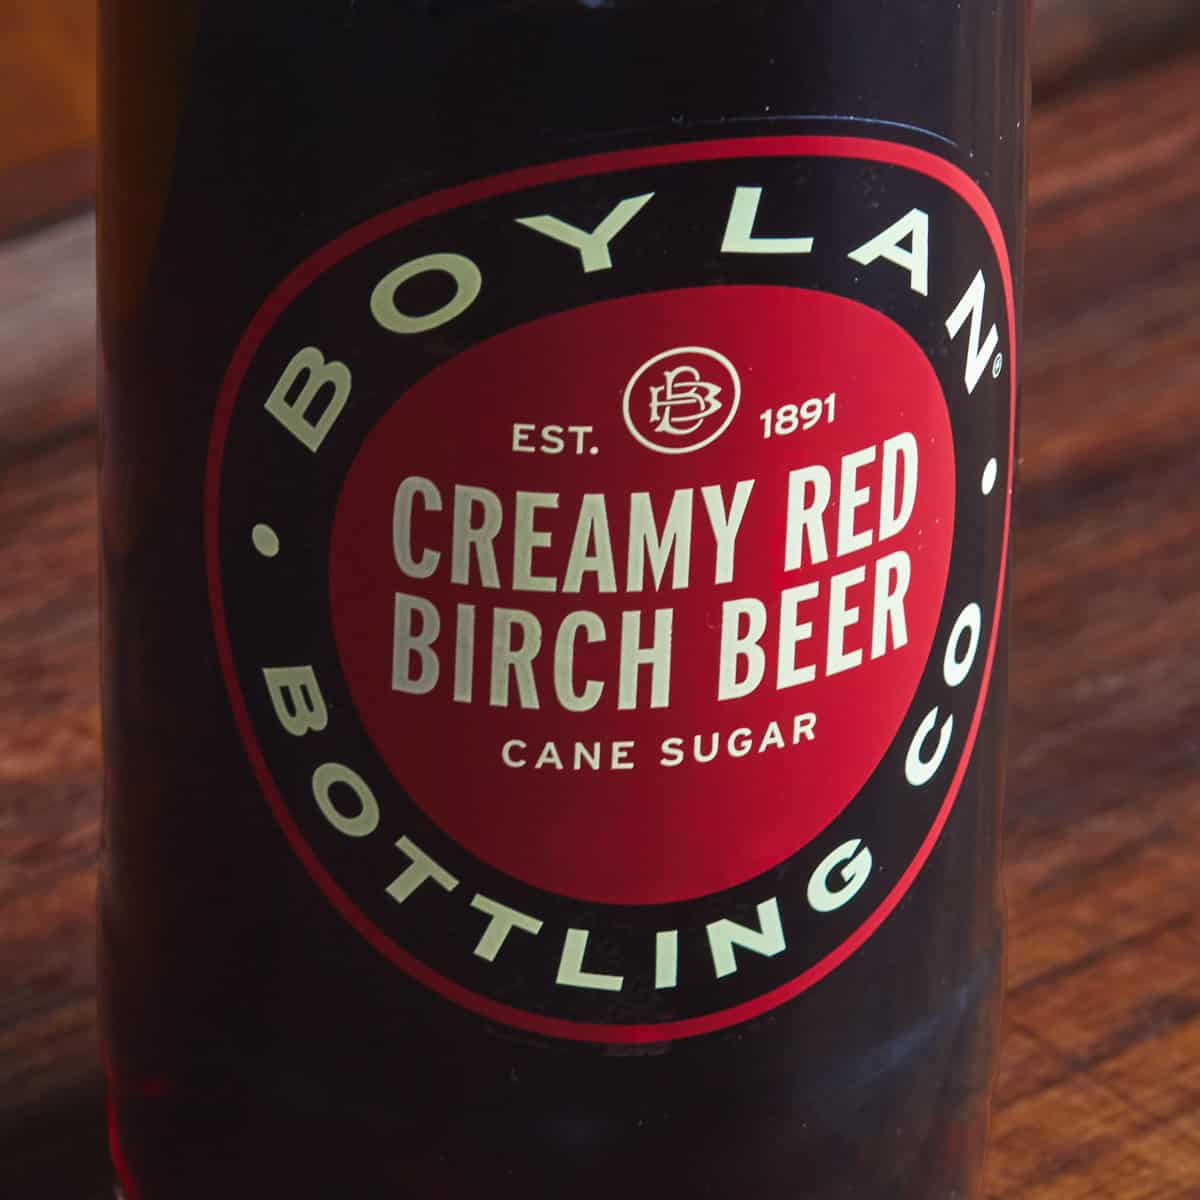 A close up of the label on a bottle of birch beer.